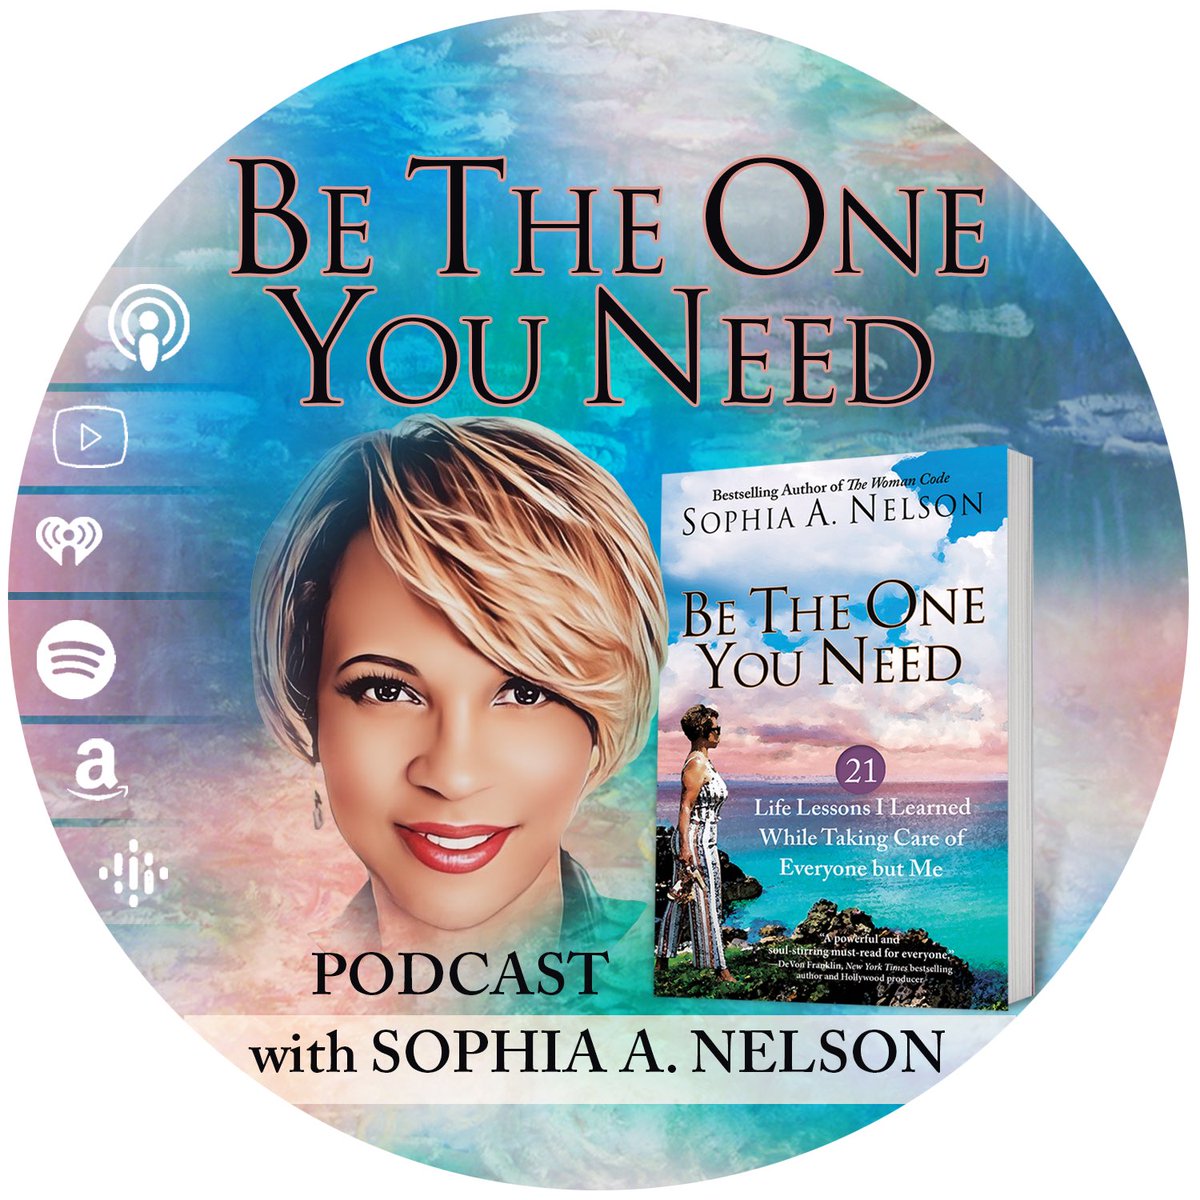 My inspirational wellness and self-care podcast will be back tomorrow, Sunday May 5th. Make sure you are following @BetheOneYouNeed  #MentalHealthAwareness #MentalHealthMatters #wellbeing #wellness